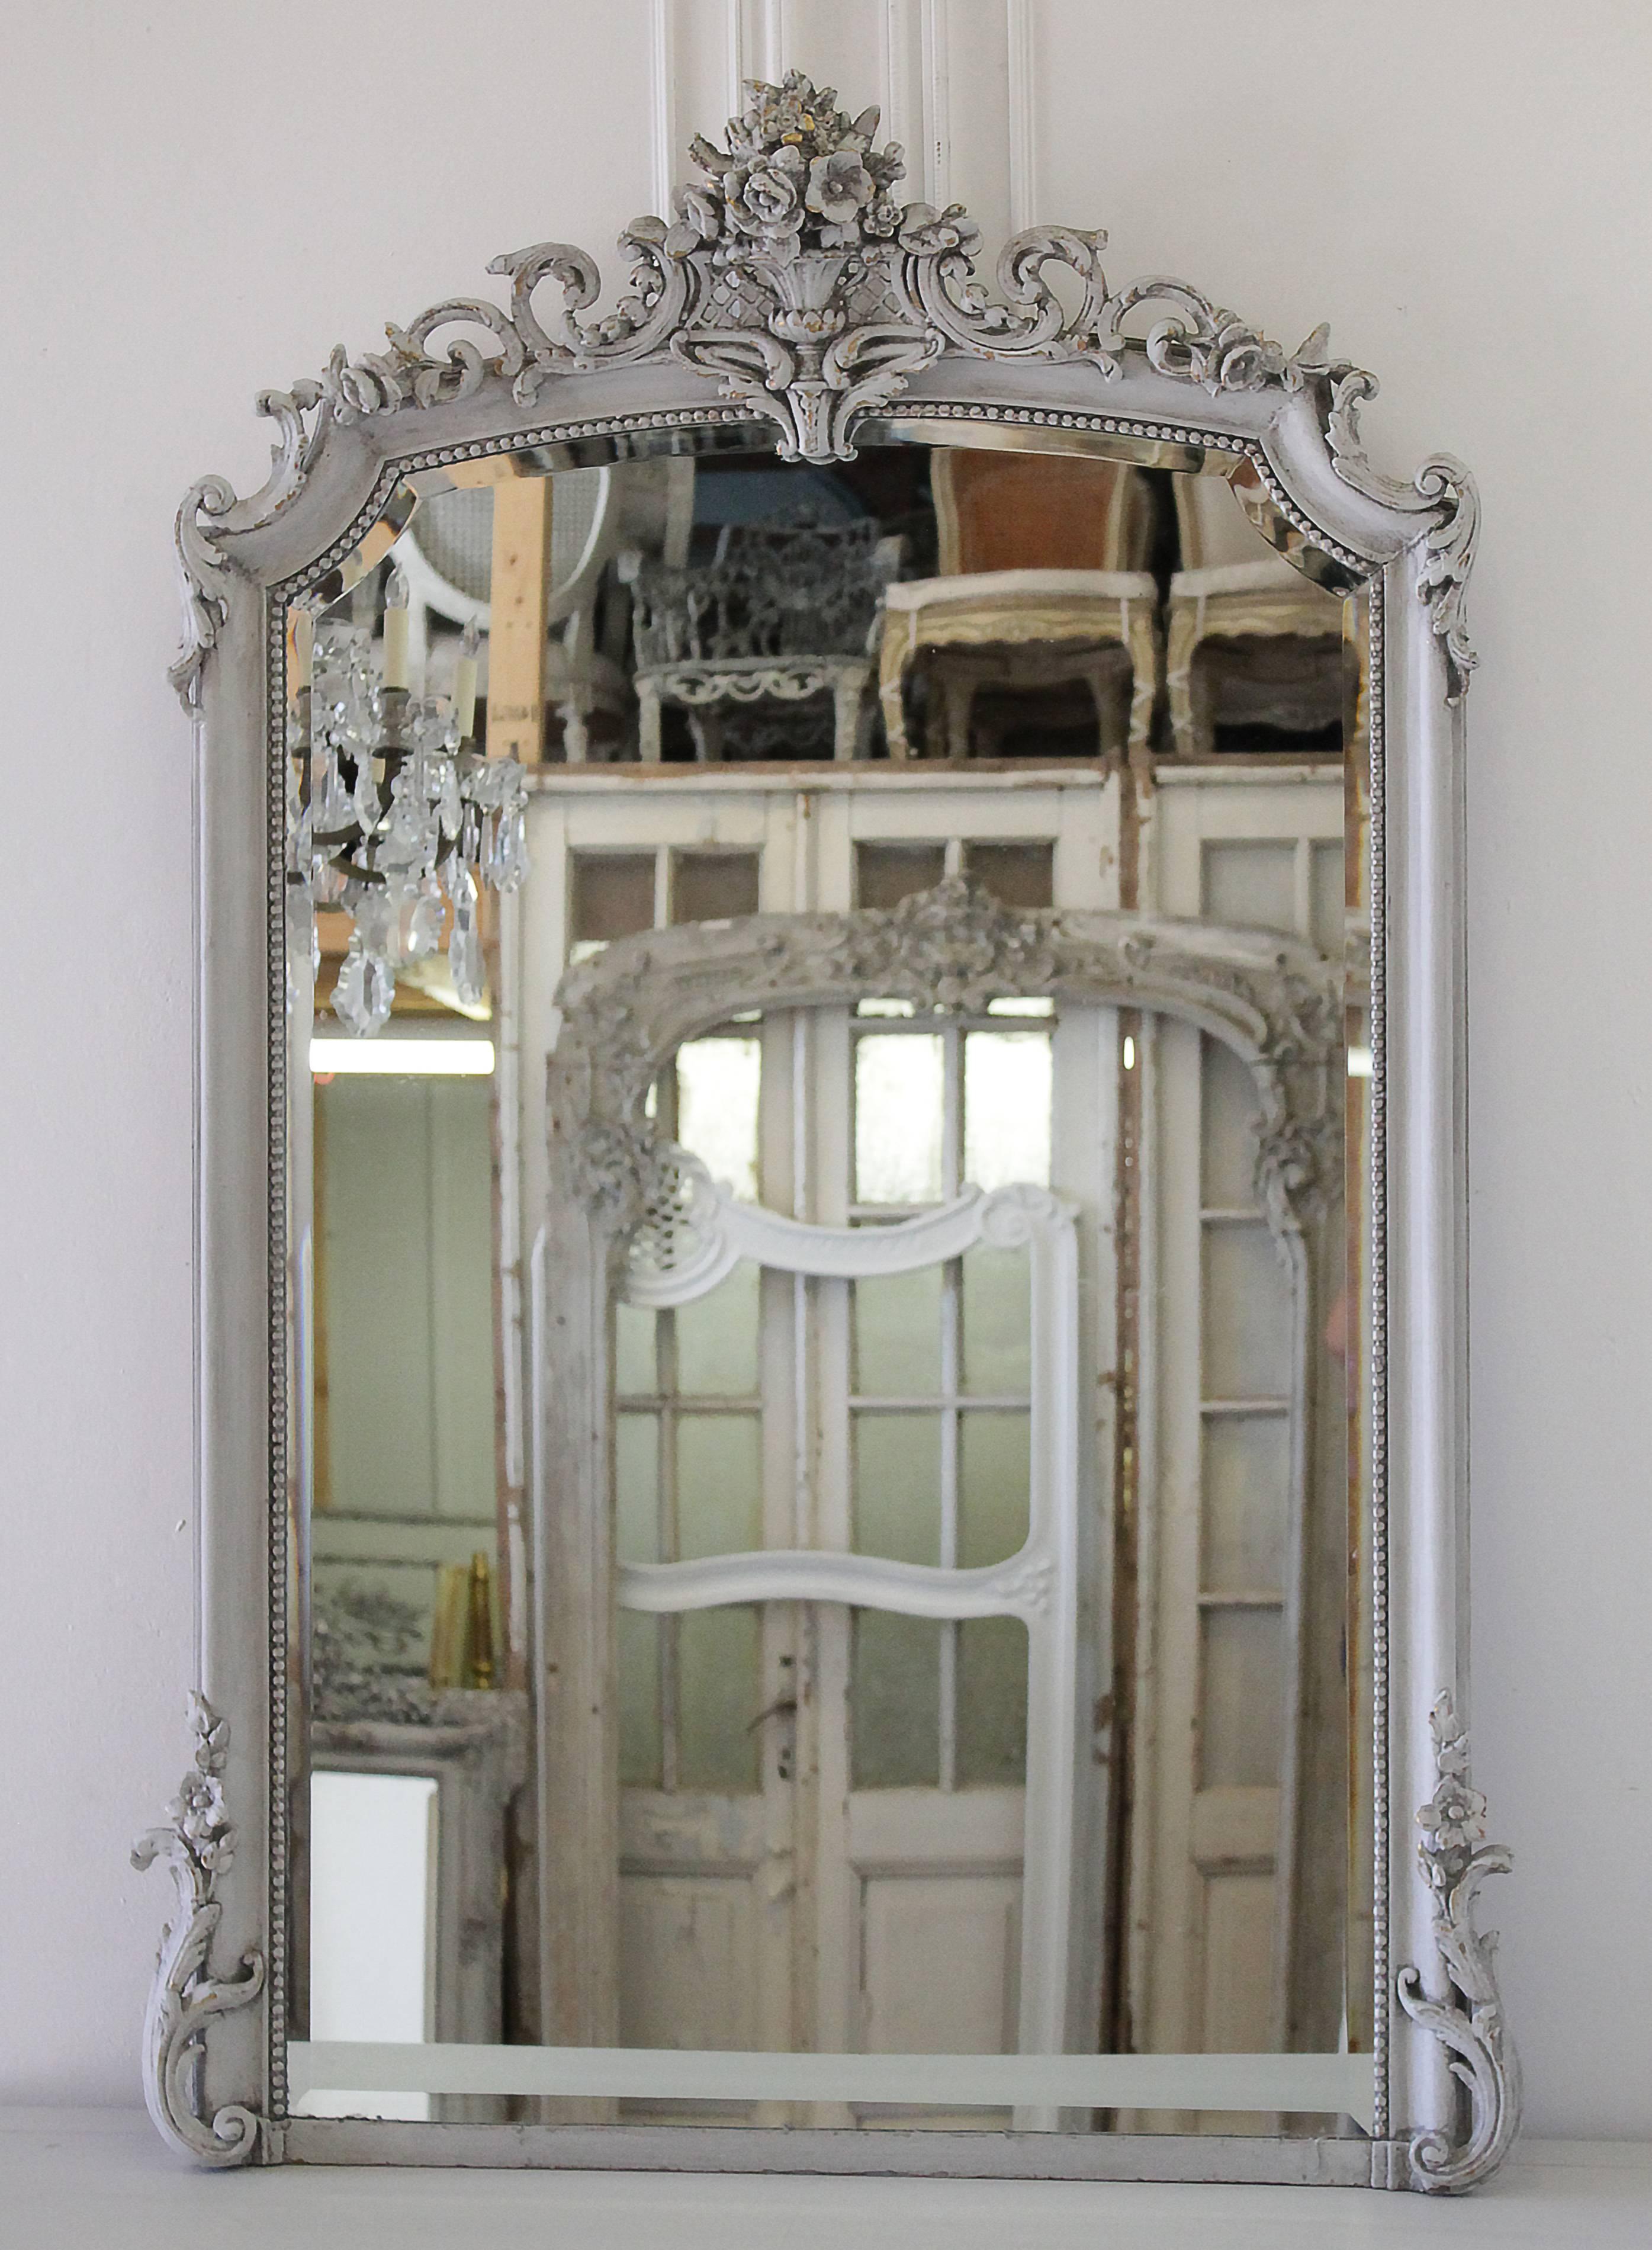 Beautiful antique mirror painted in our French Cobblestone grey finish, with distressing, and a hand glazed finish. Original bevel mirror shows subtle signs of age throughout. Large urn with roses spilling over into scrolls and more roses with a